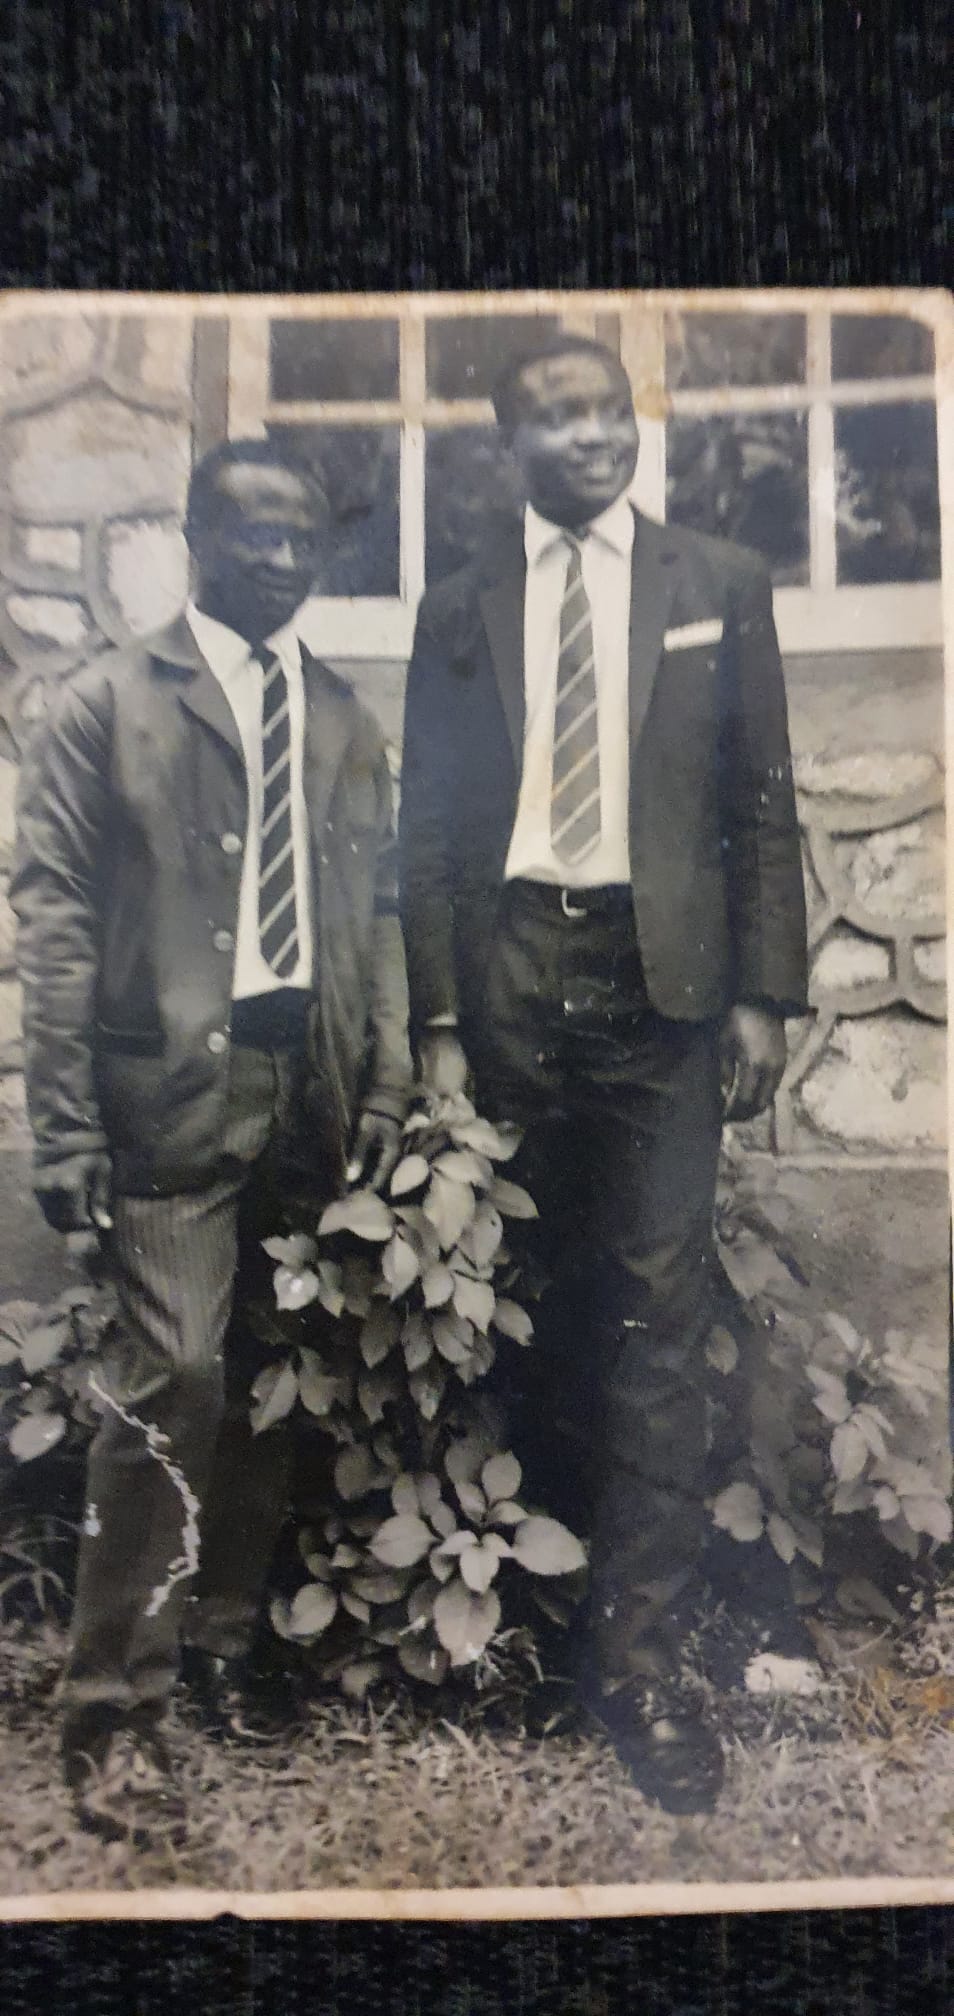 Dr Denis with classmate in 1969